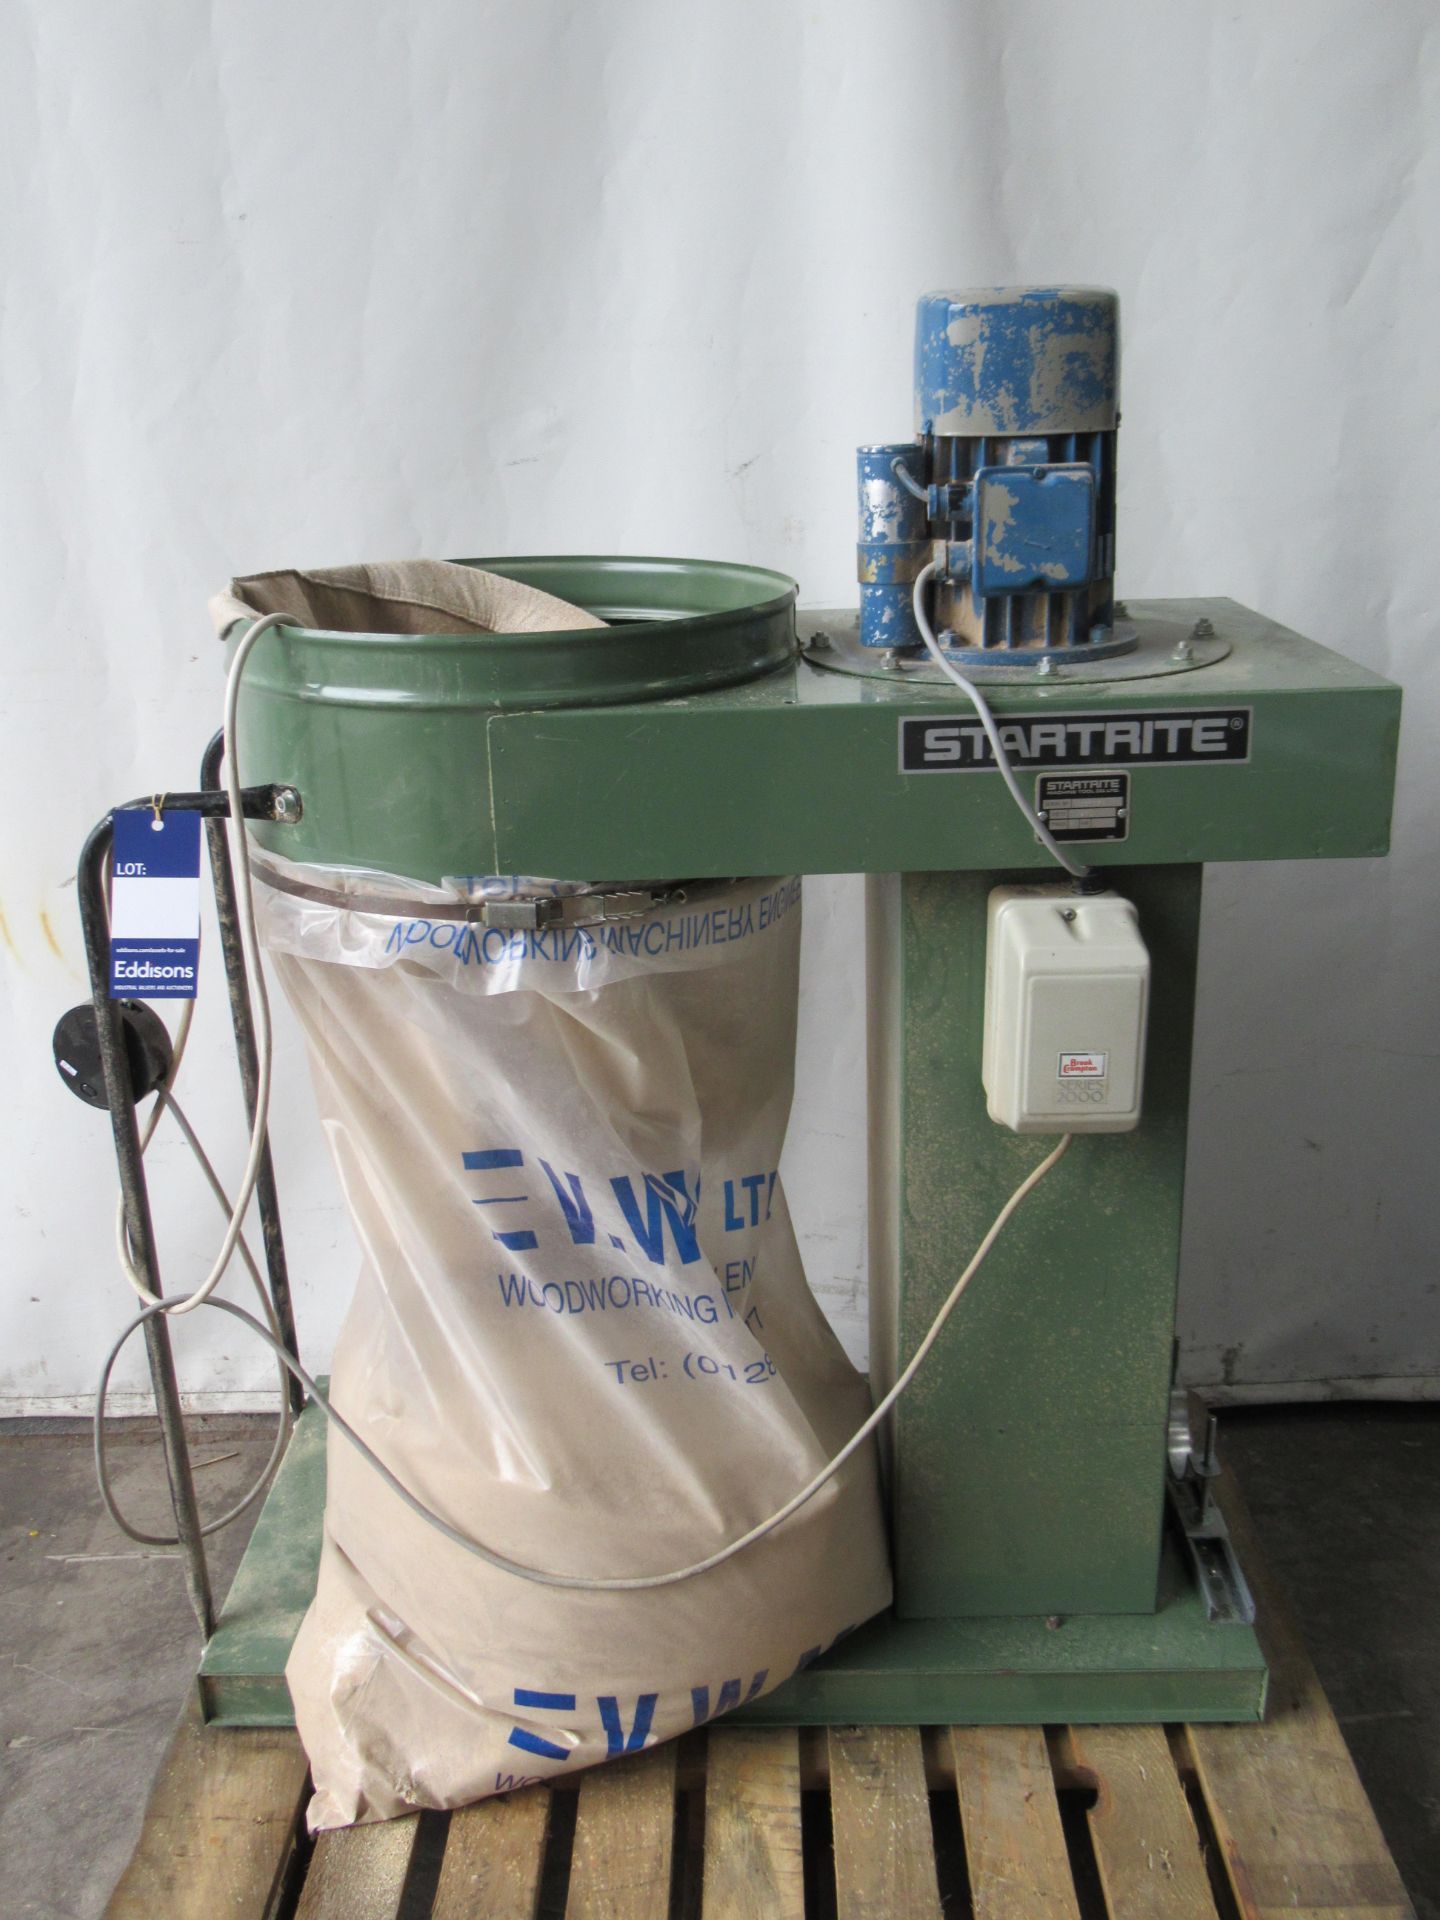 Robland single bag dust extraction unit - Image 2 of 5